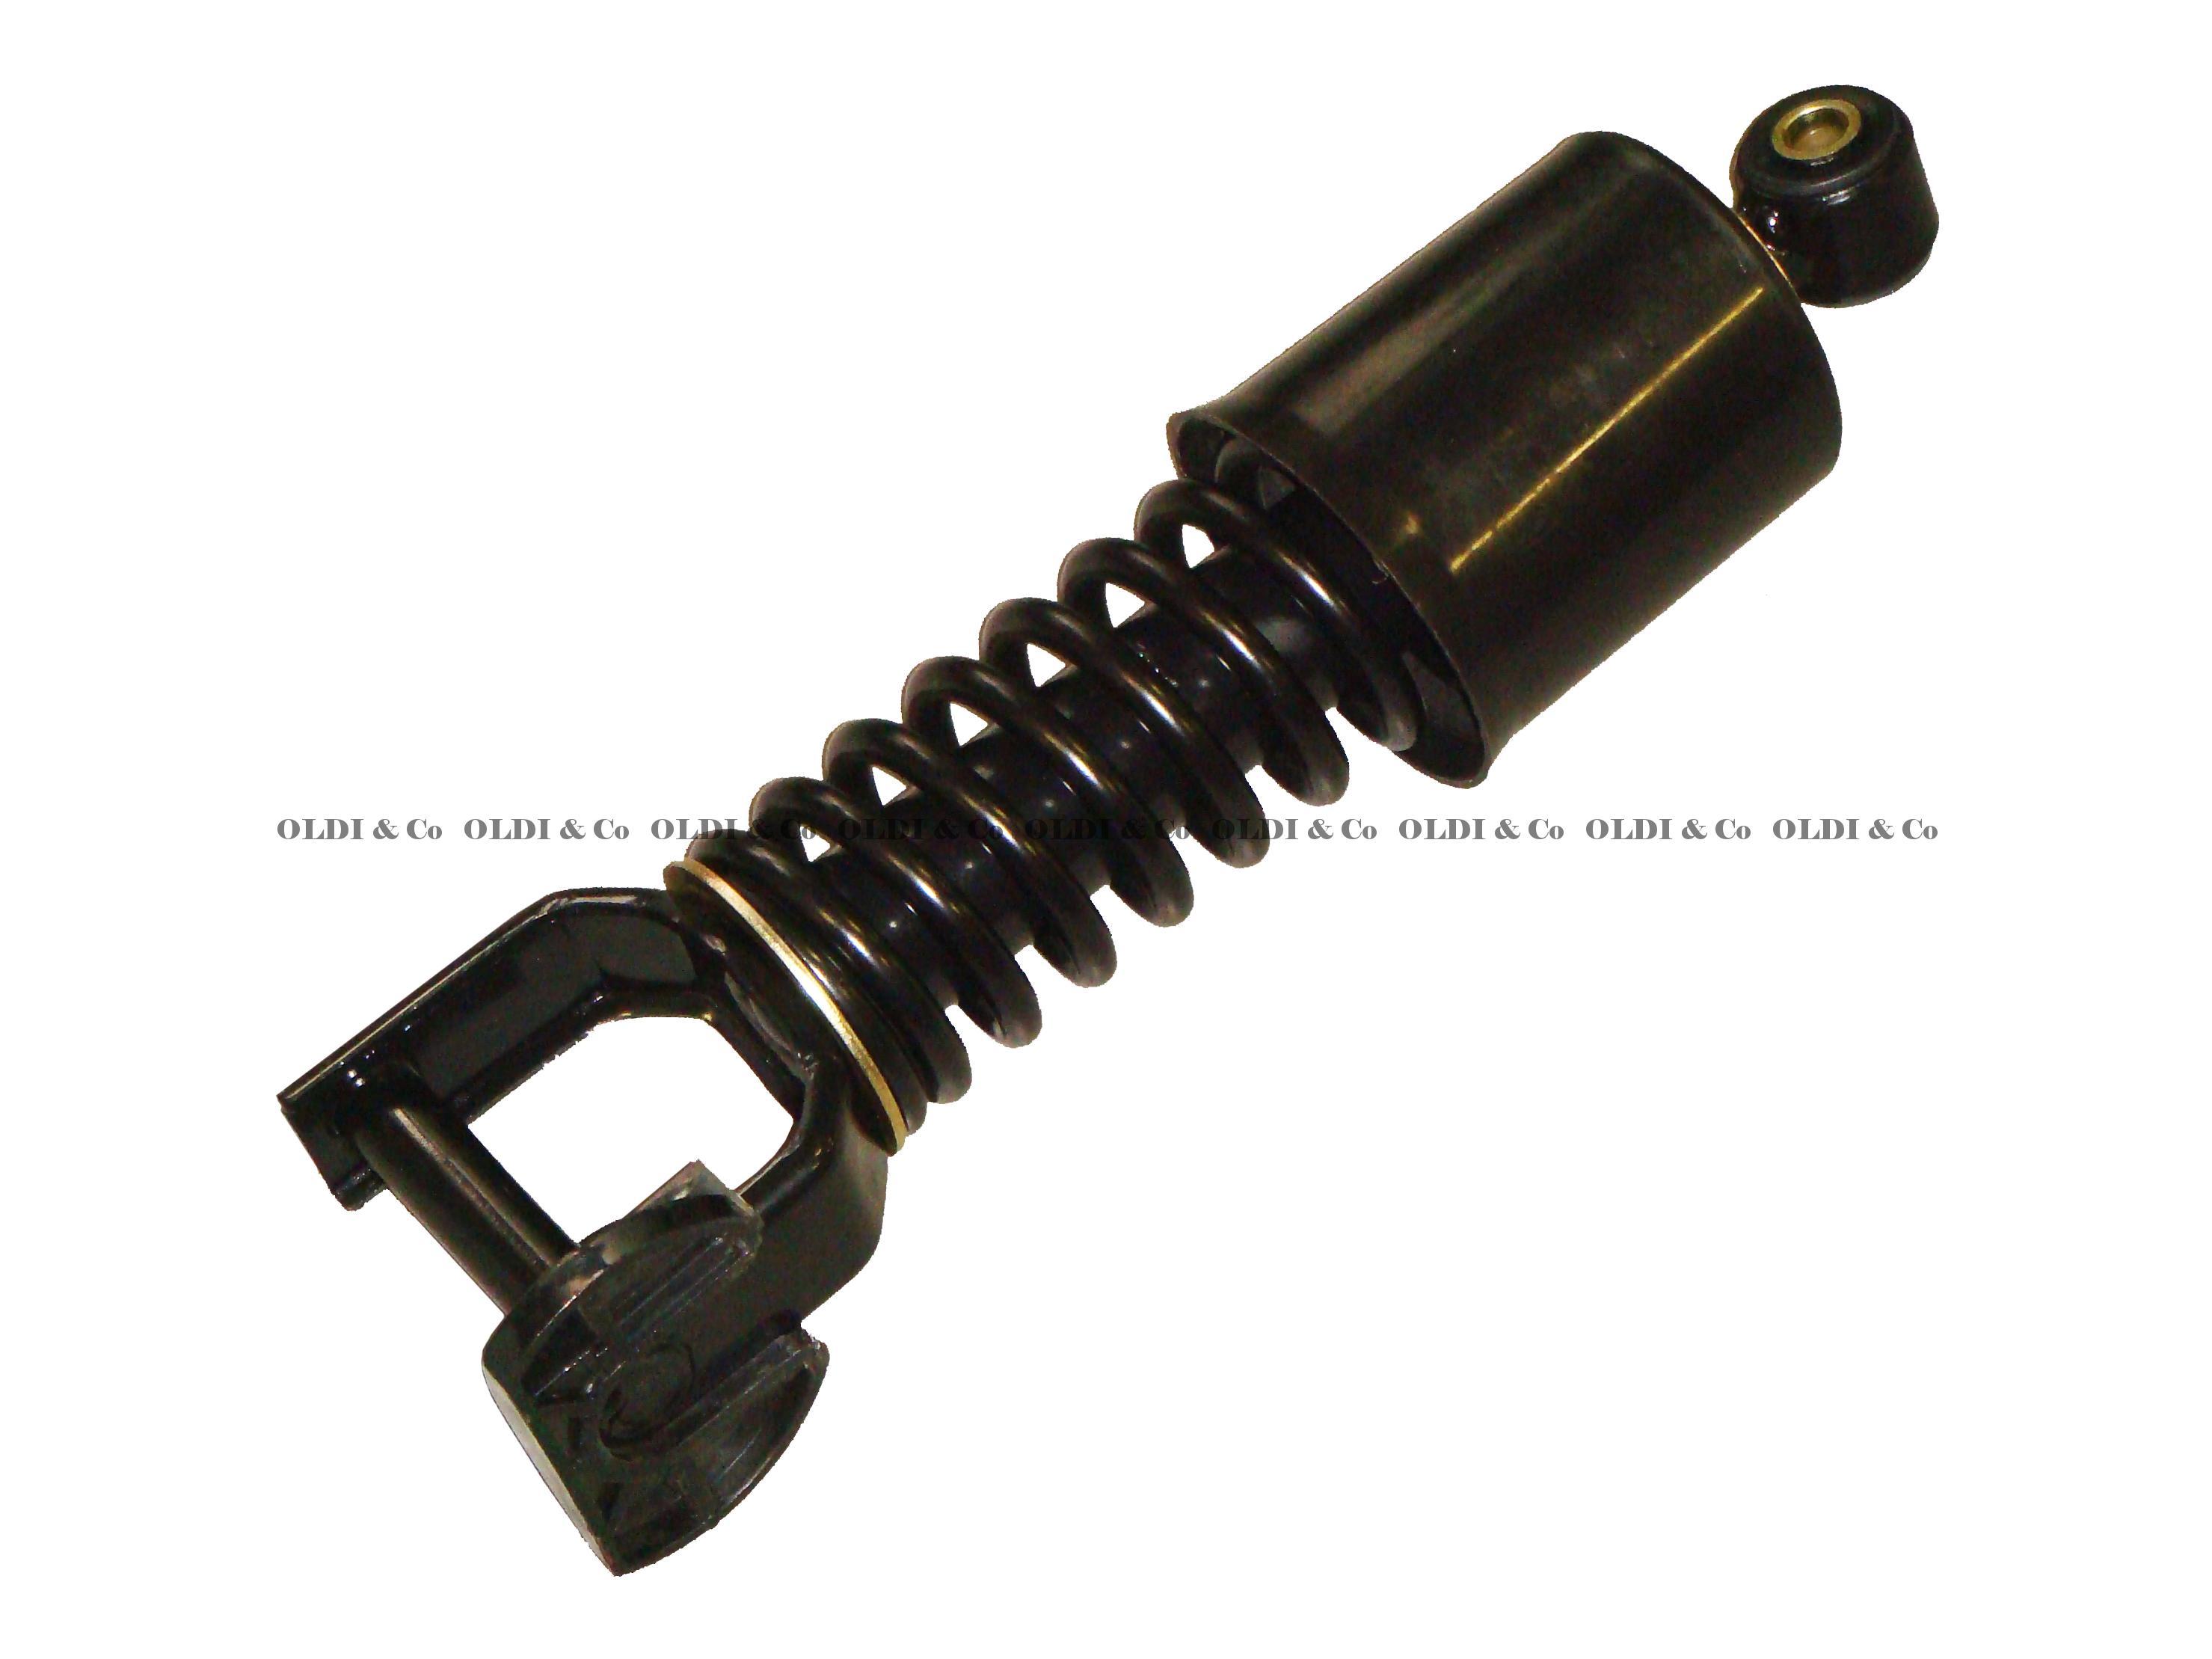 07.001.18976 Cabin parts → Cab shock absorber